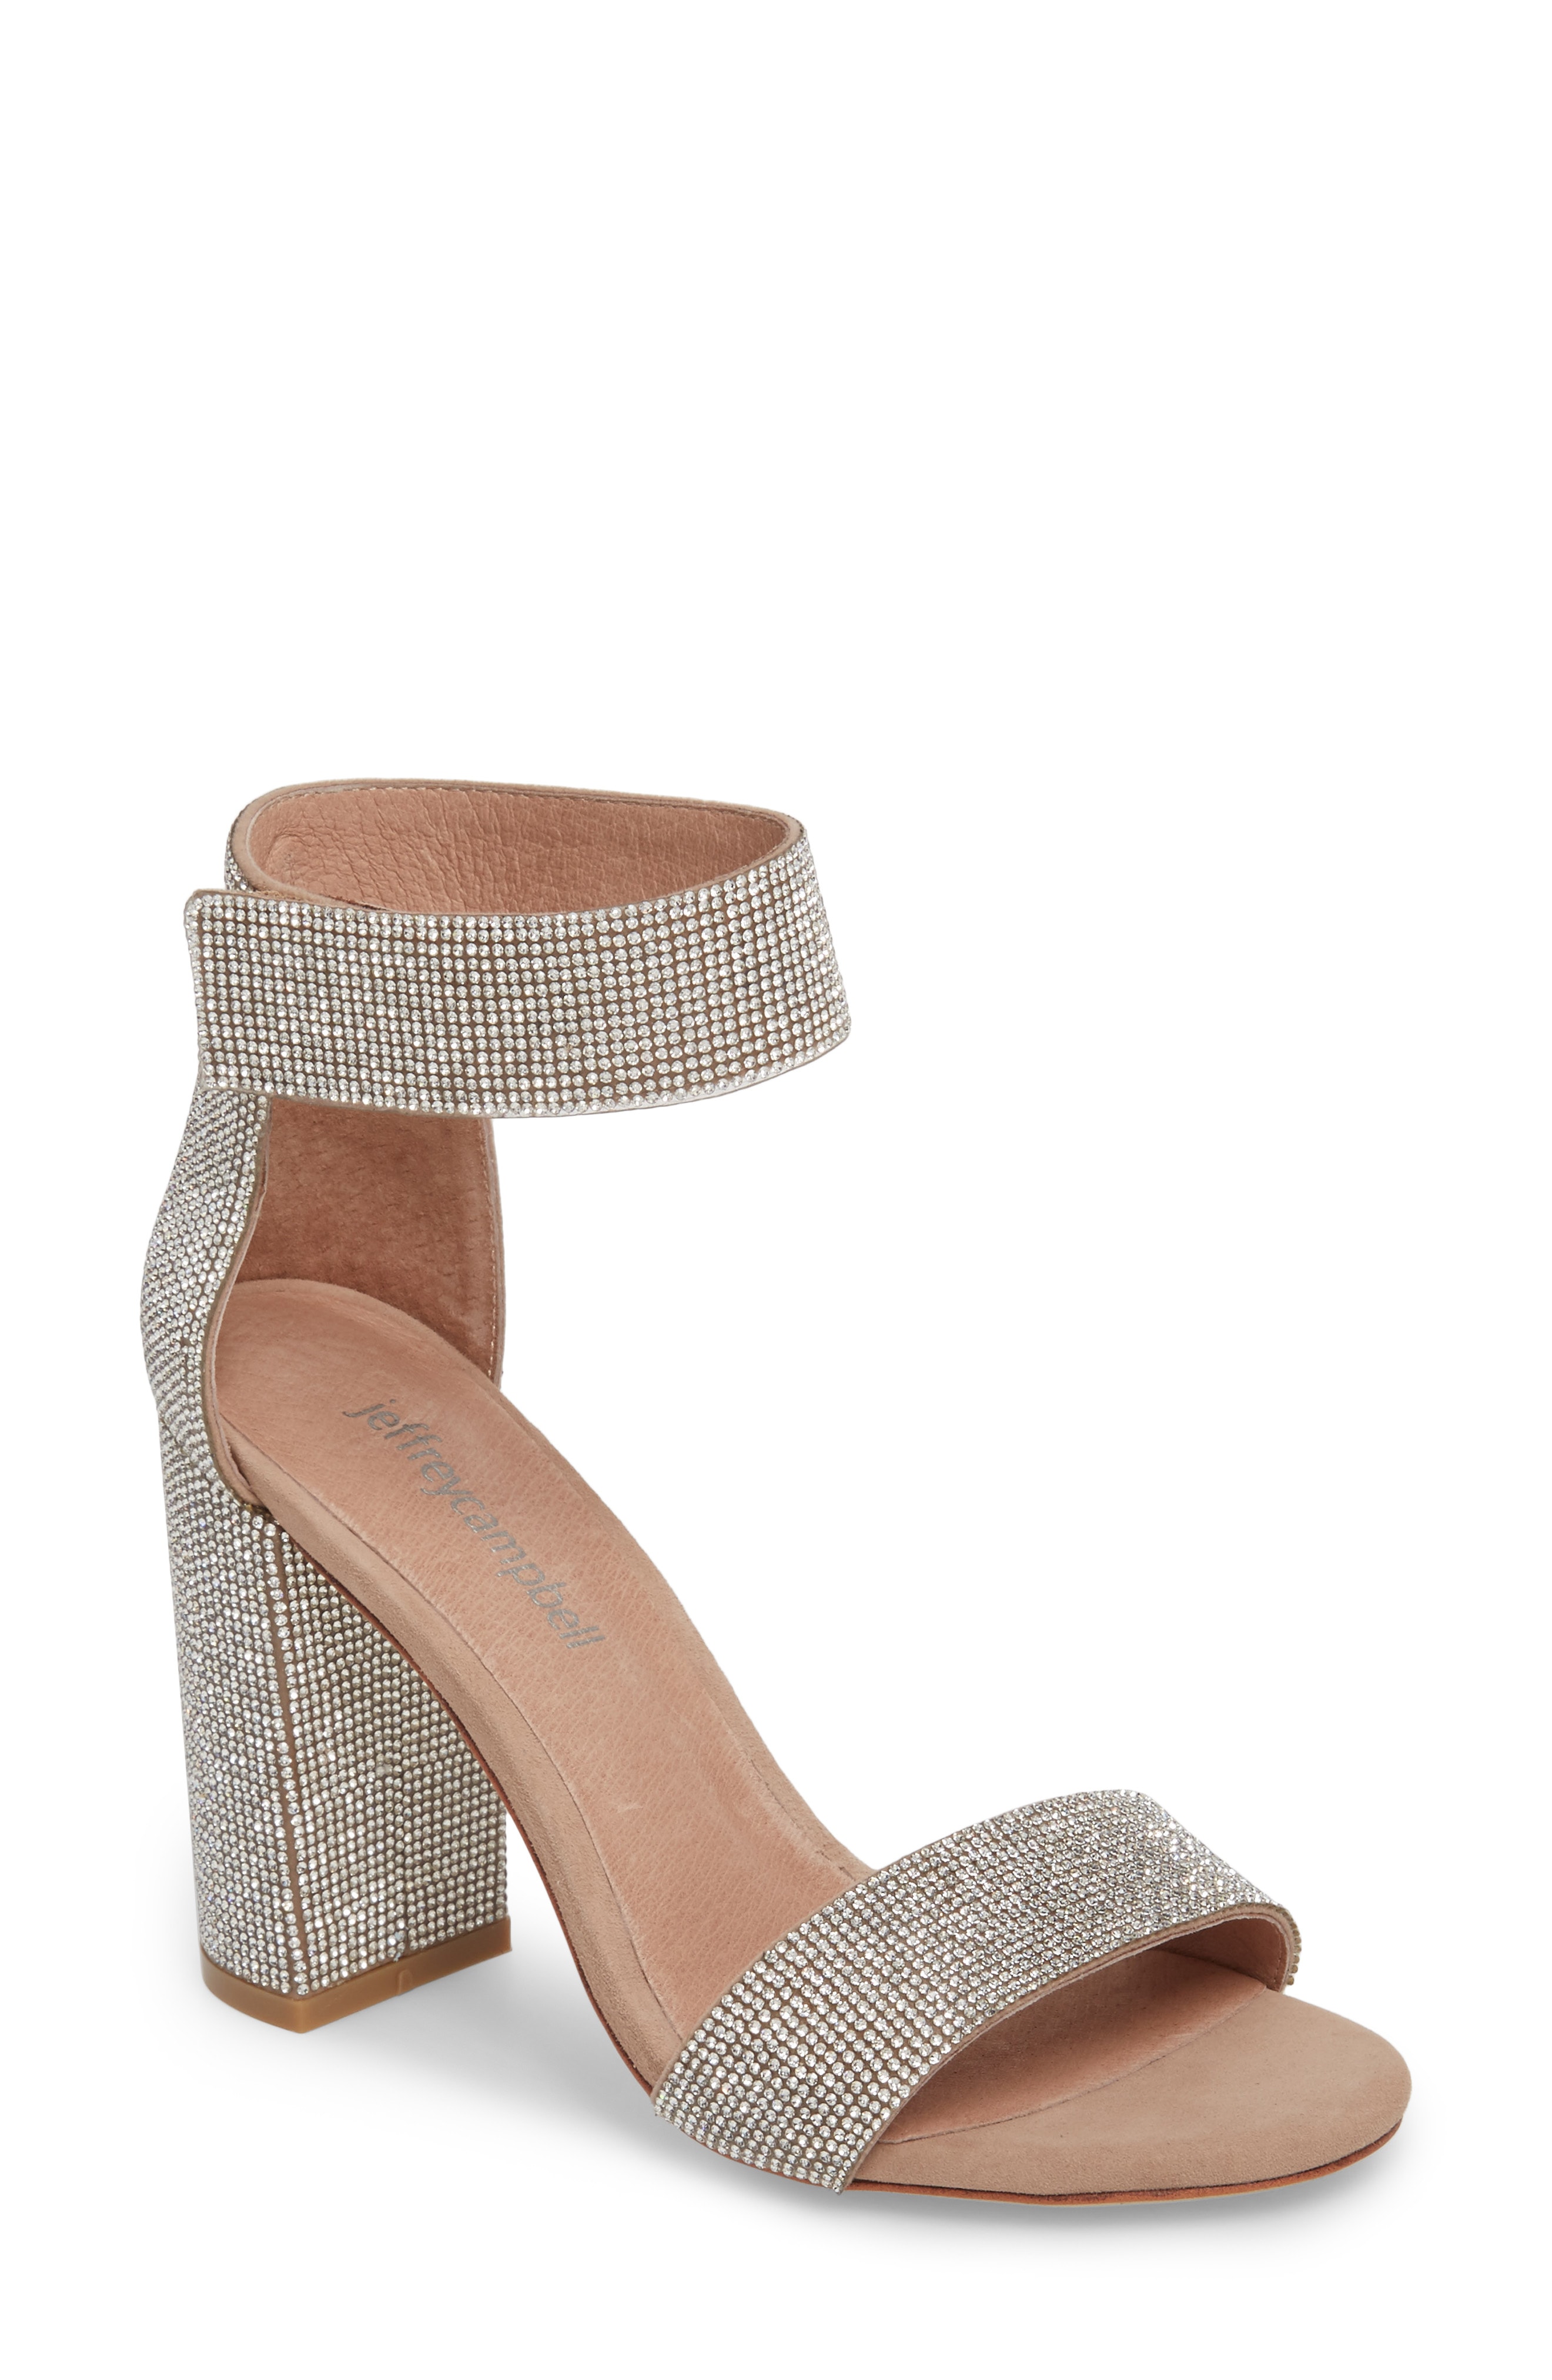 champagne colored heels | Nordstrom